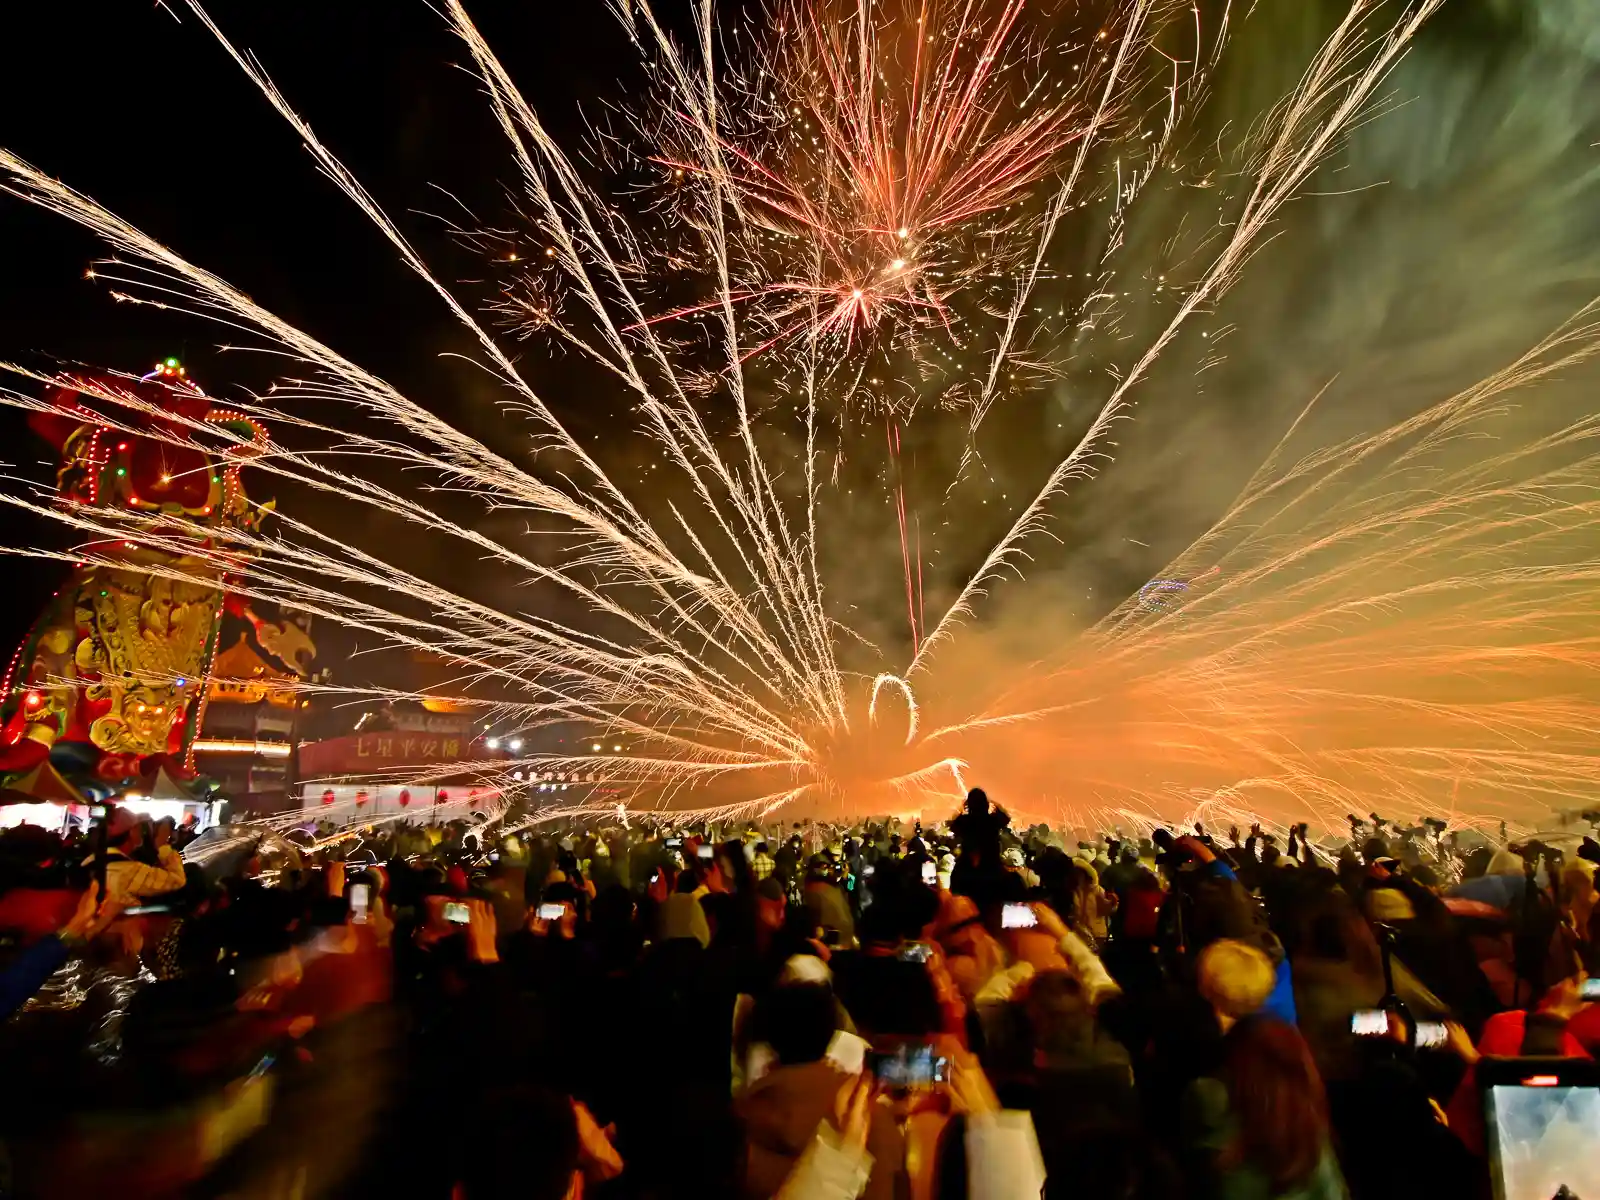 Firecrackers shoot in every direction including at the crowd in a beehive-style display.